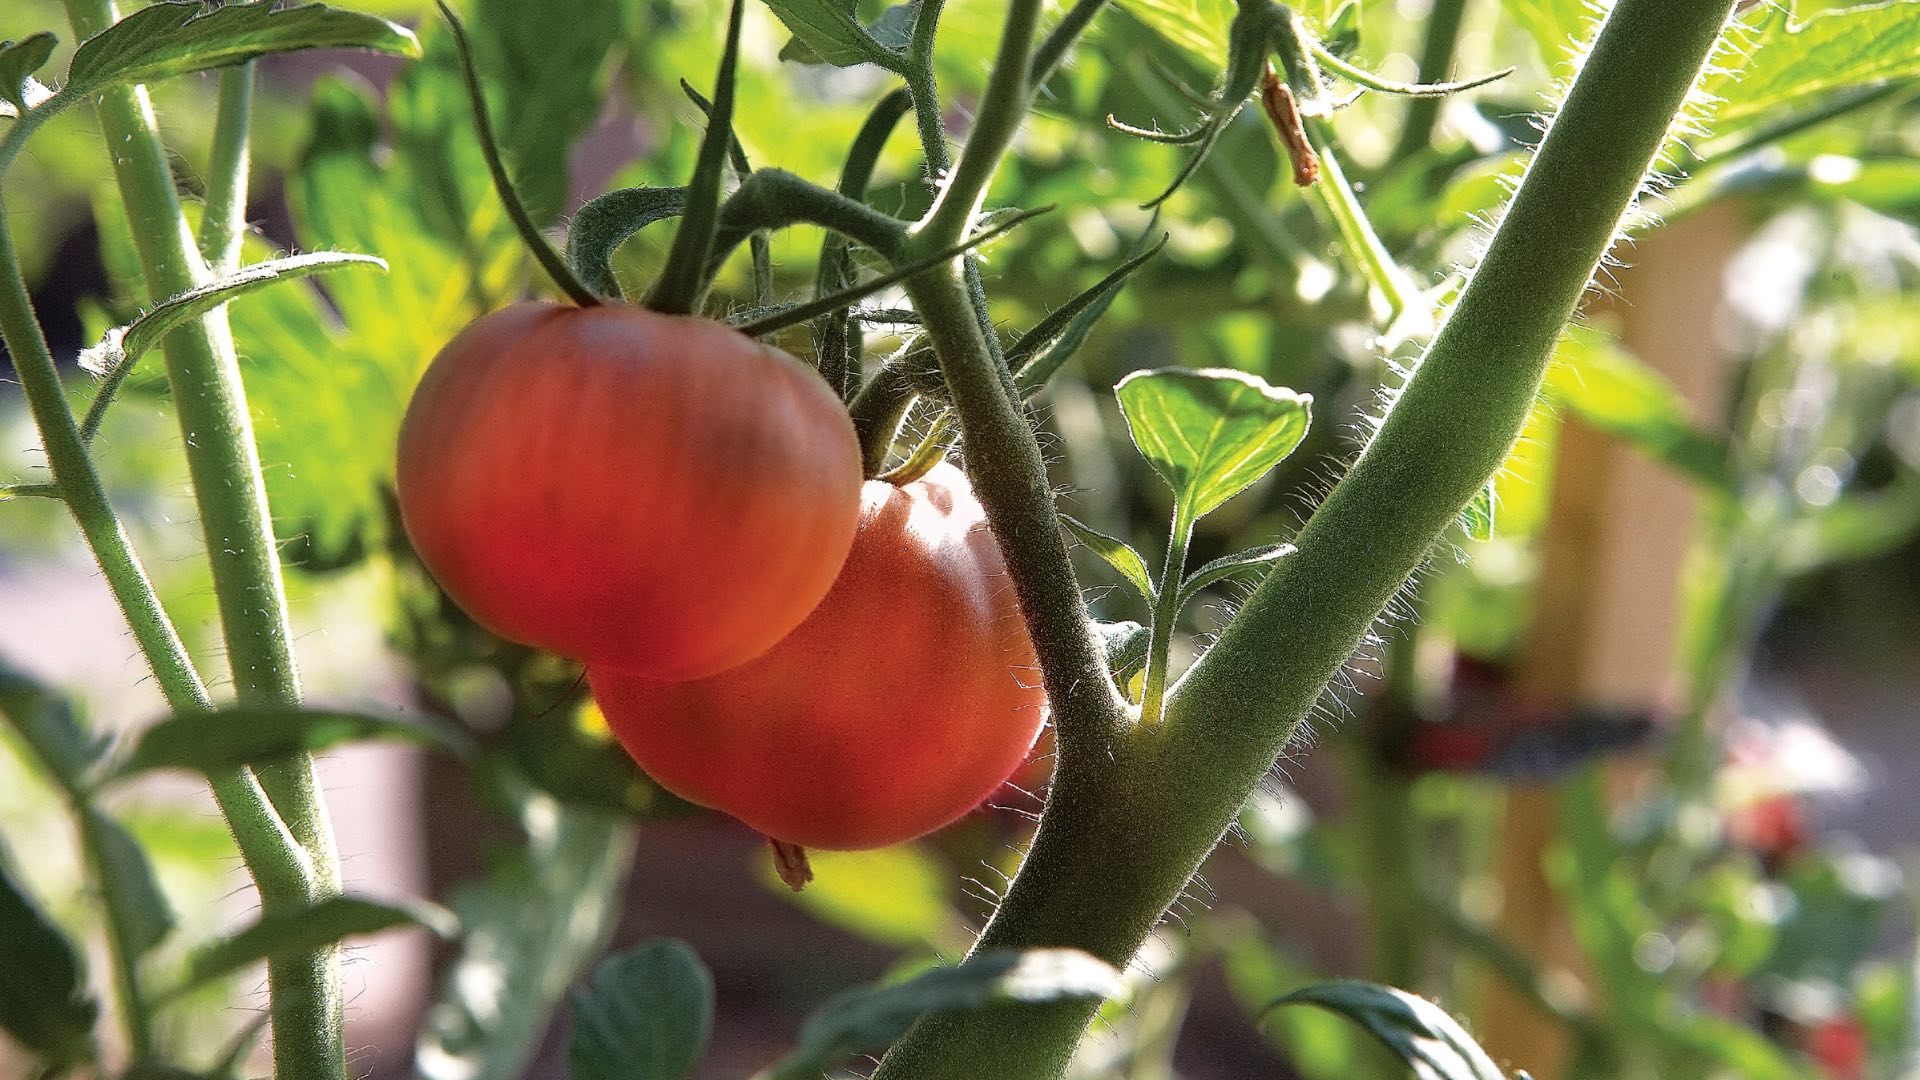 A photo of tomatoes on the vine for the Inspired Horticultural Report